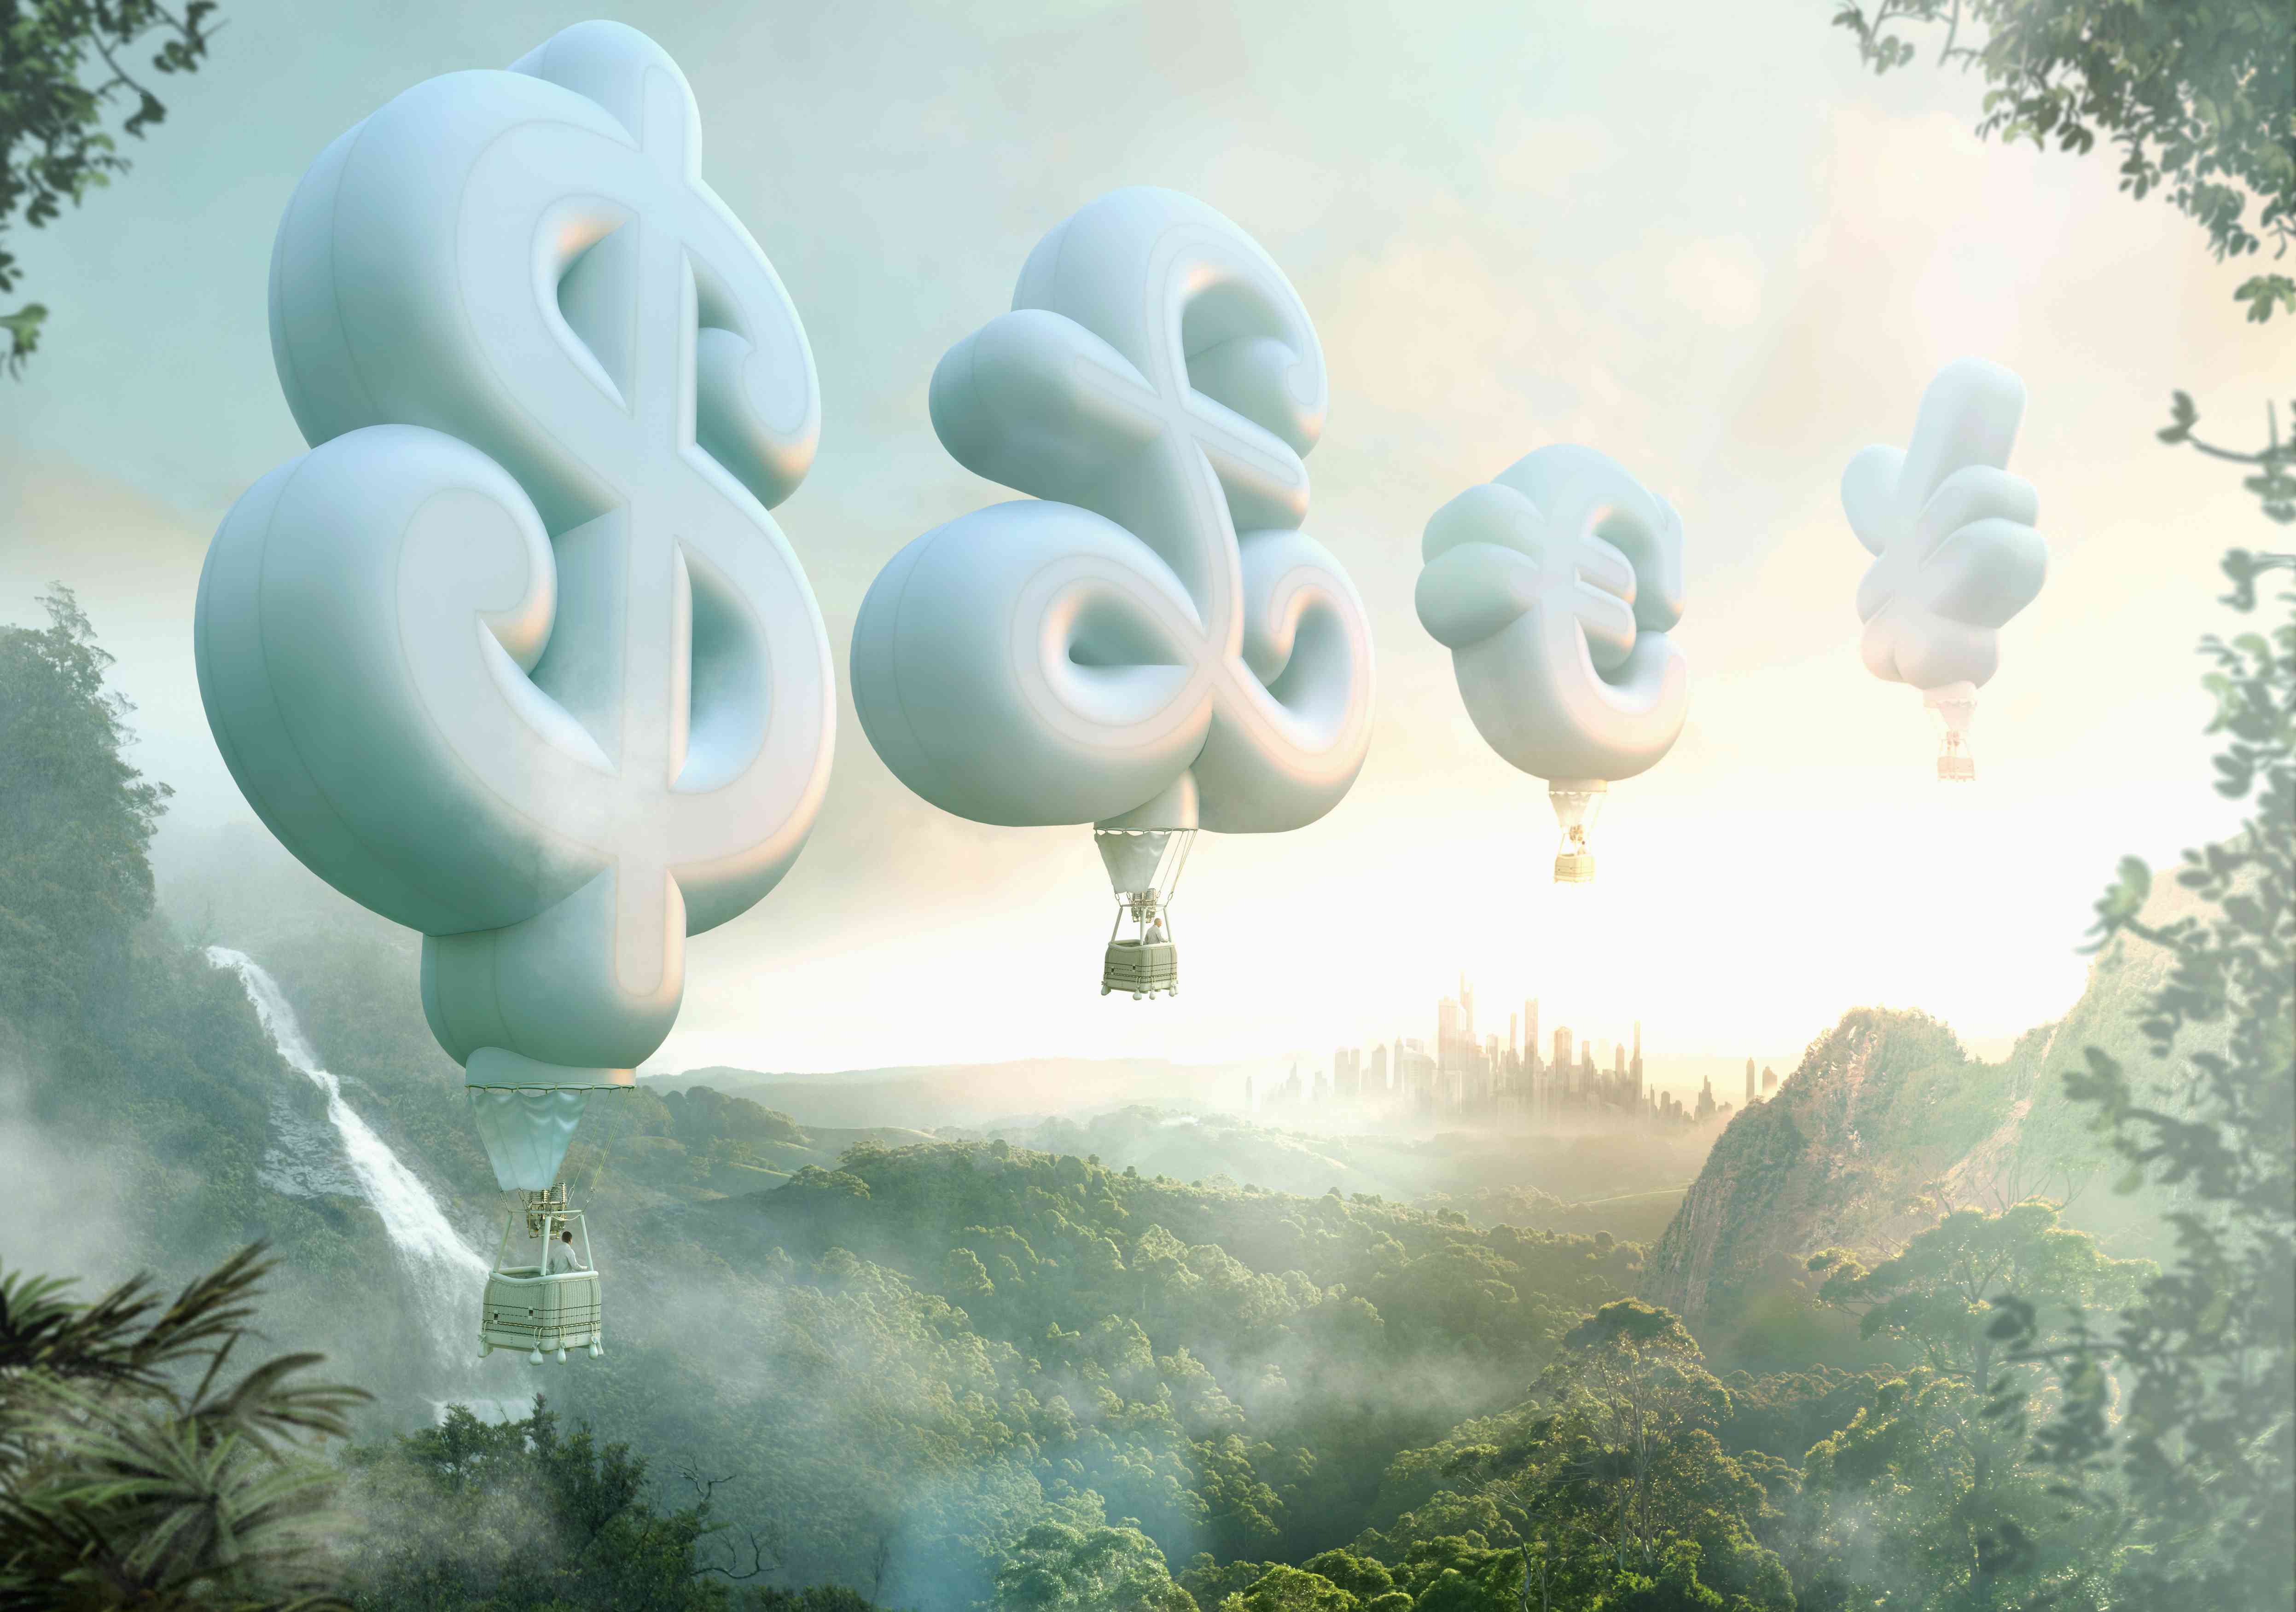 People floating in currency symbol hot air balloons